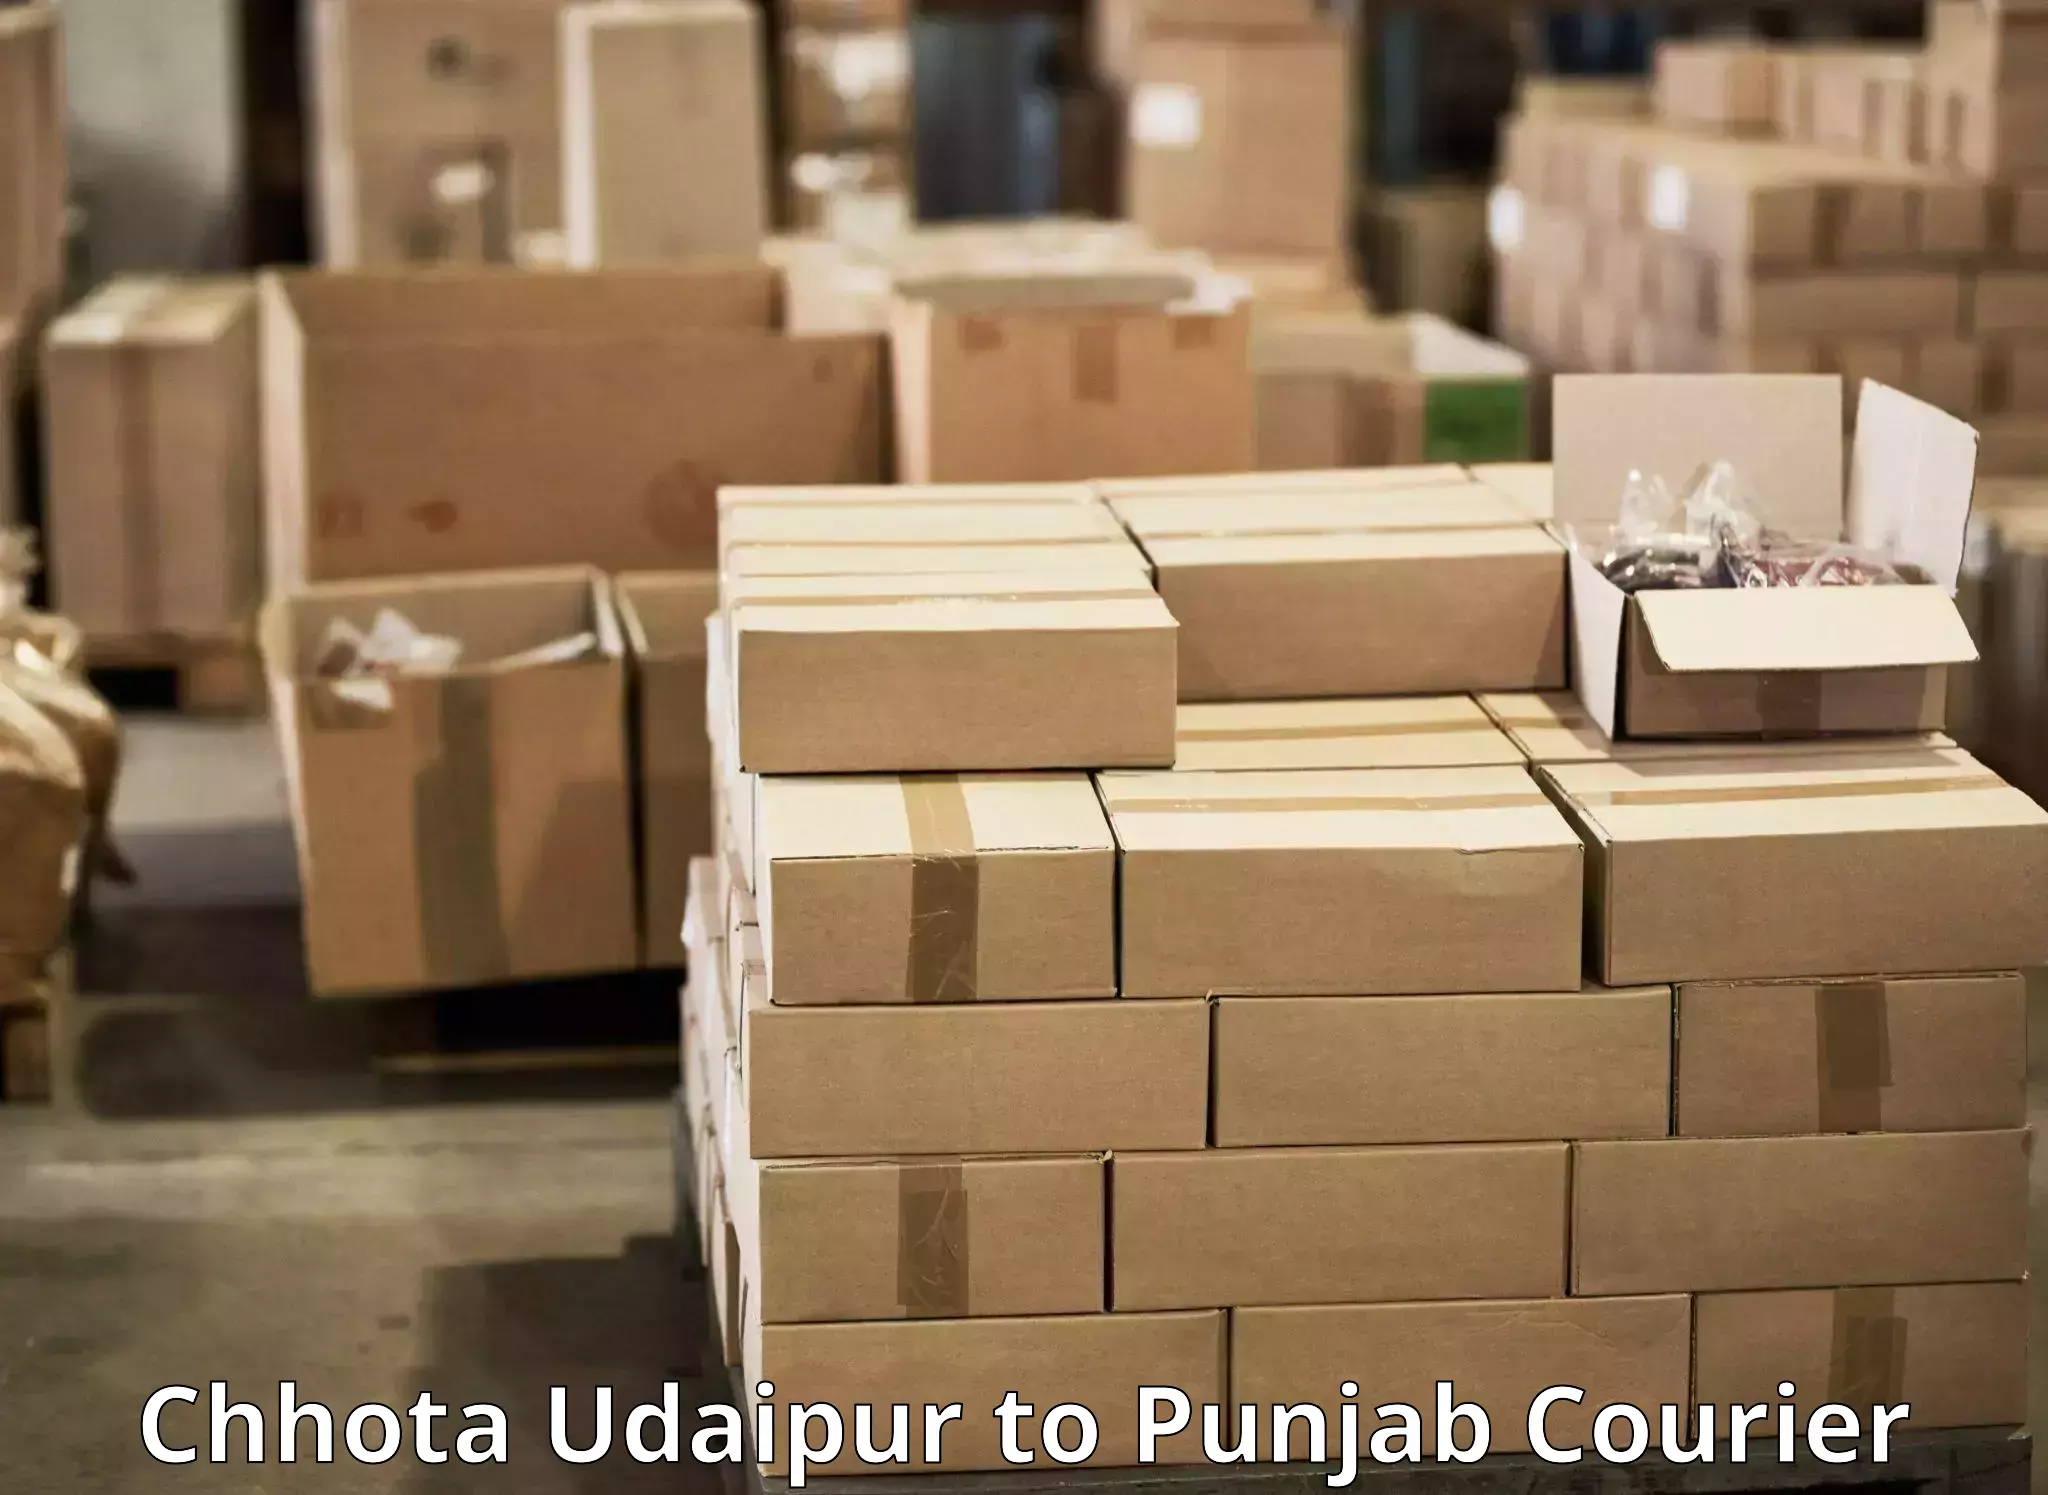 Parcel service for businesses Chhota Udaipur to Zirakpur